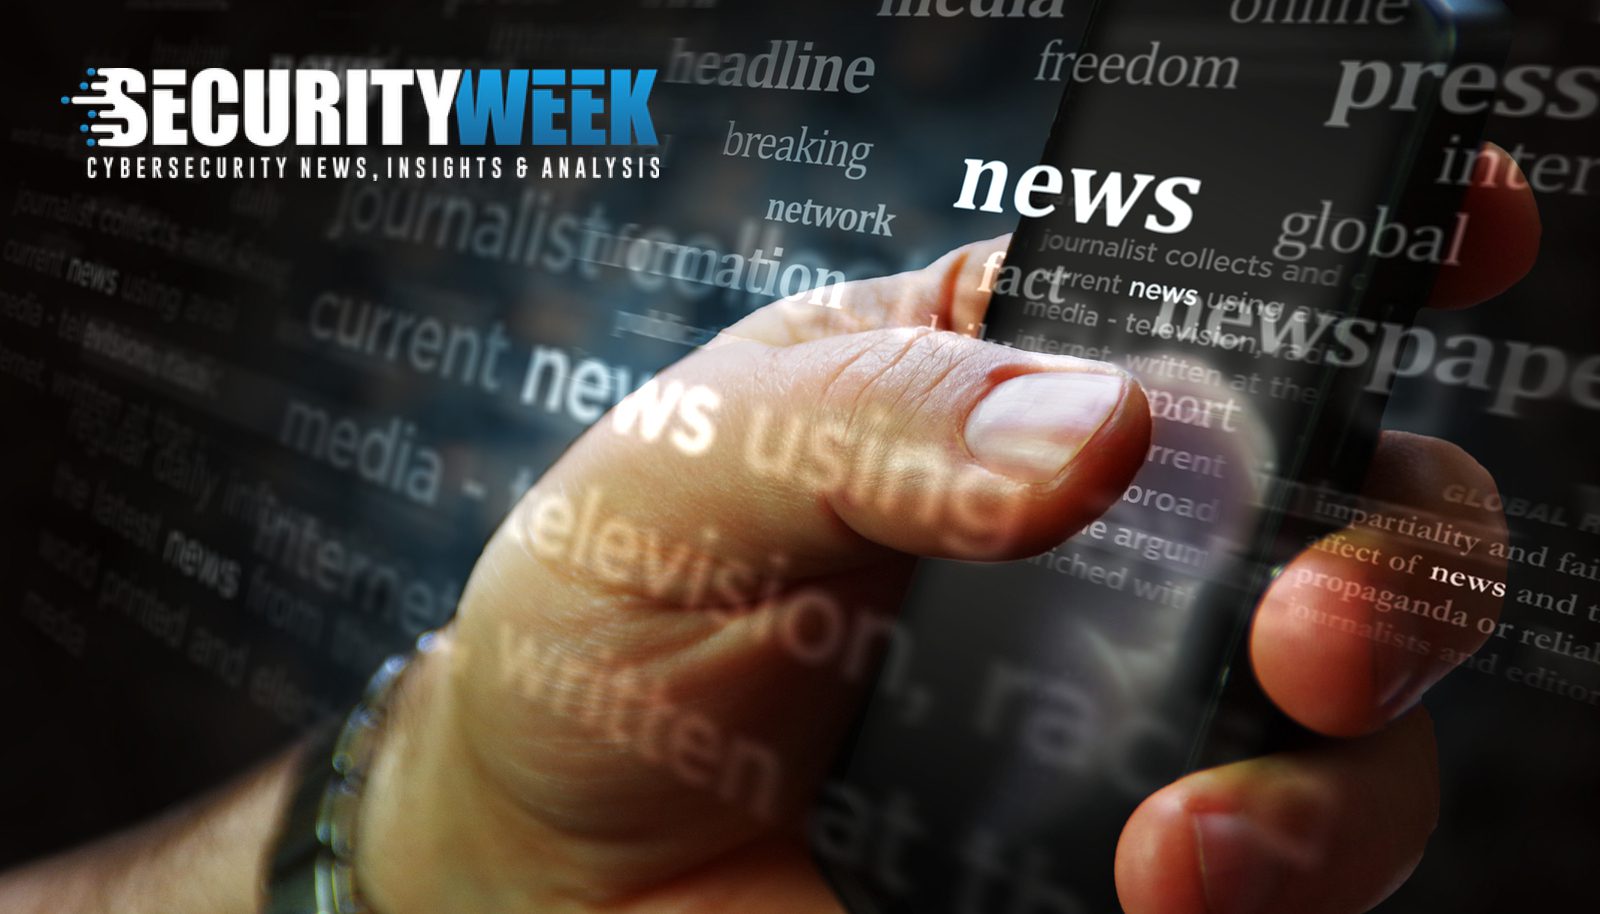 In Other News: Hospital Infected via USB Drive, EU Cybersecurity Rules, Free Security Tools – Source: www.securityweek.com